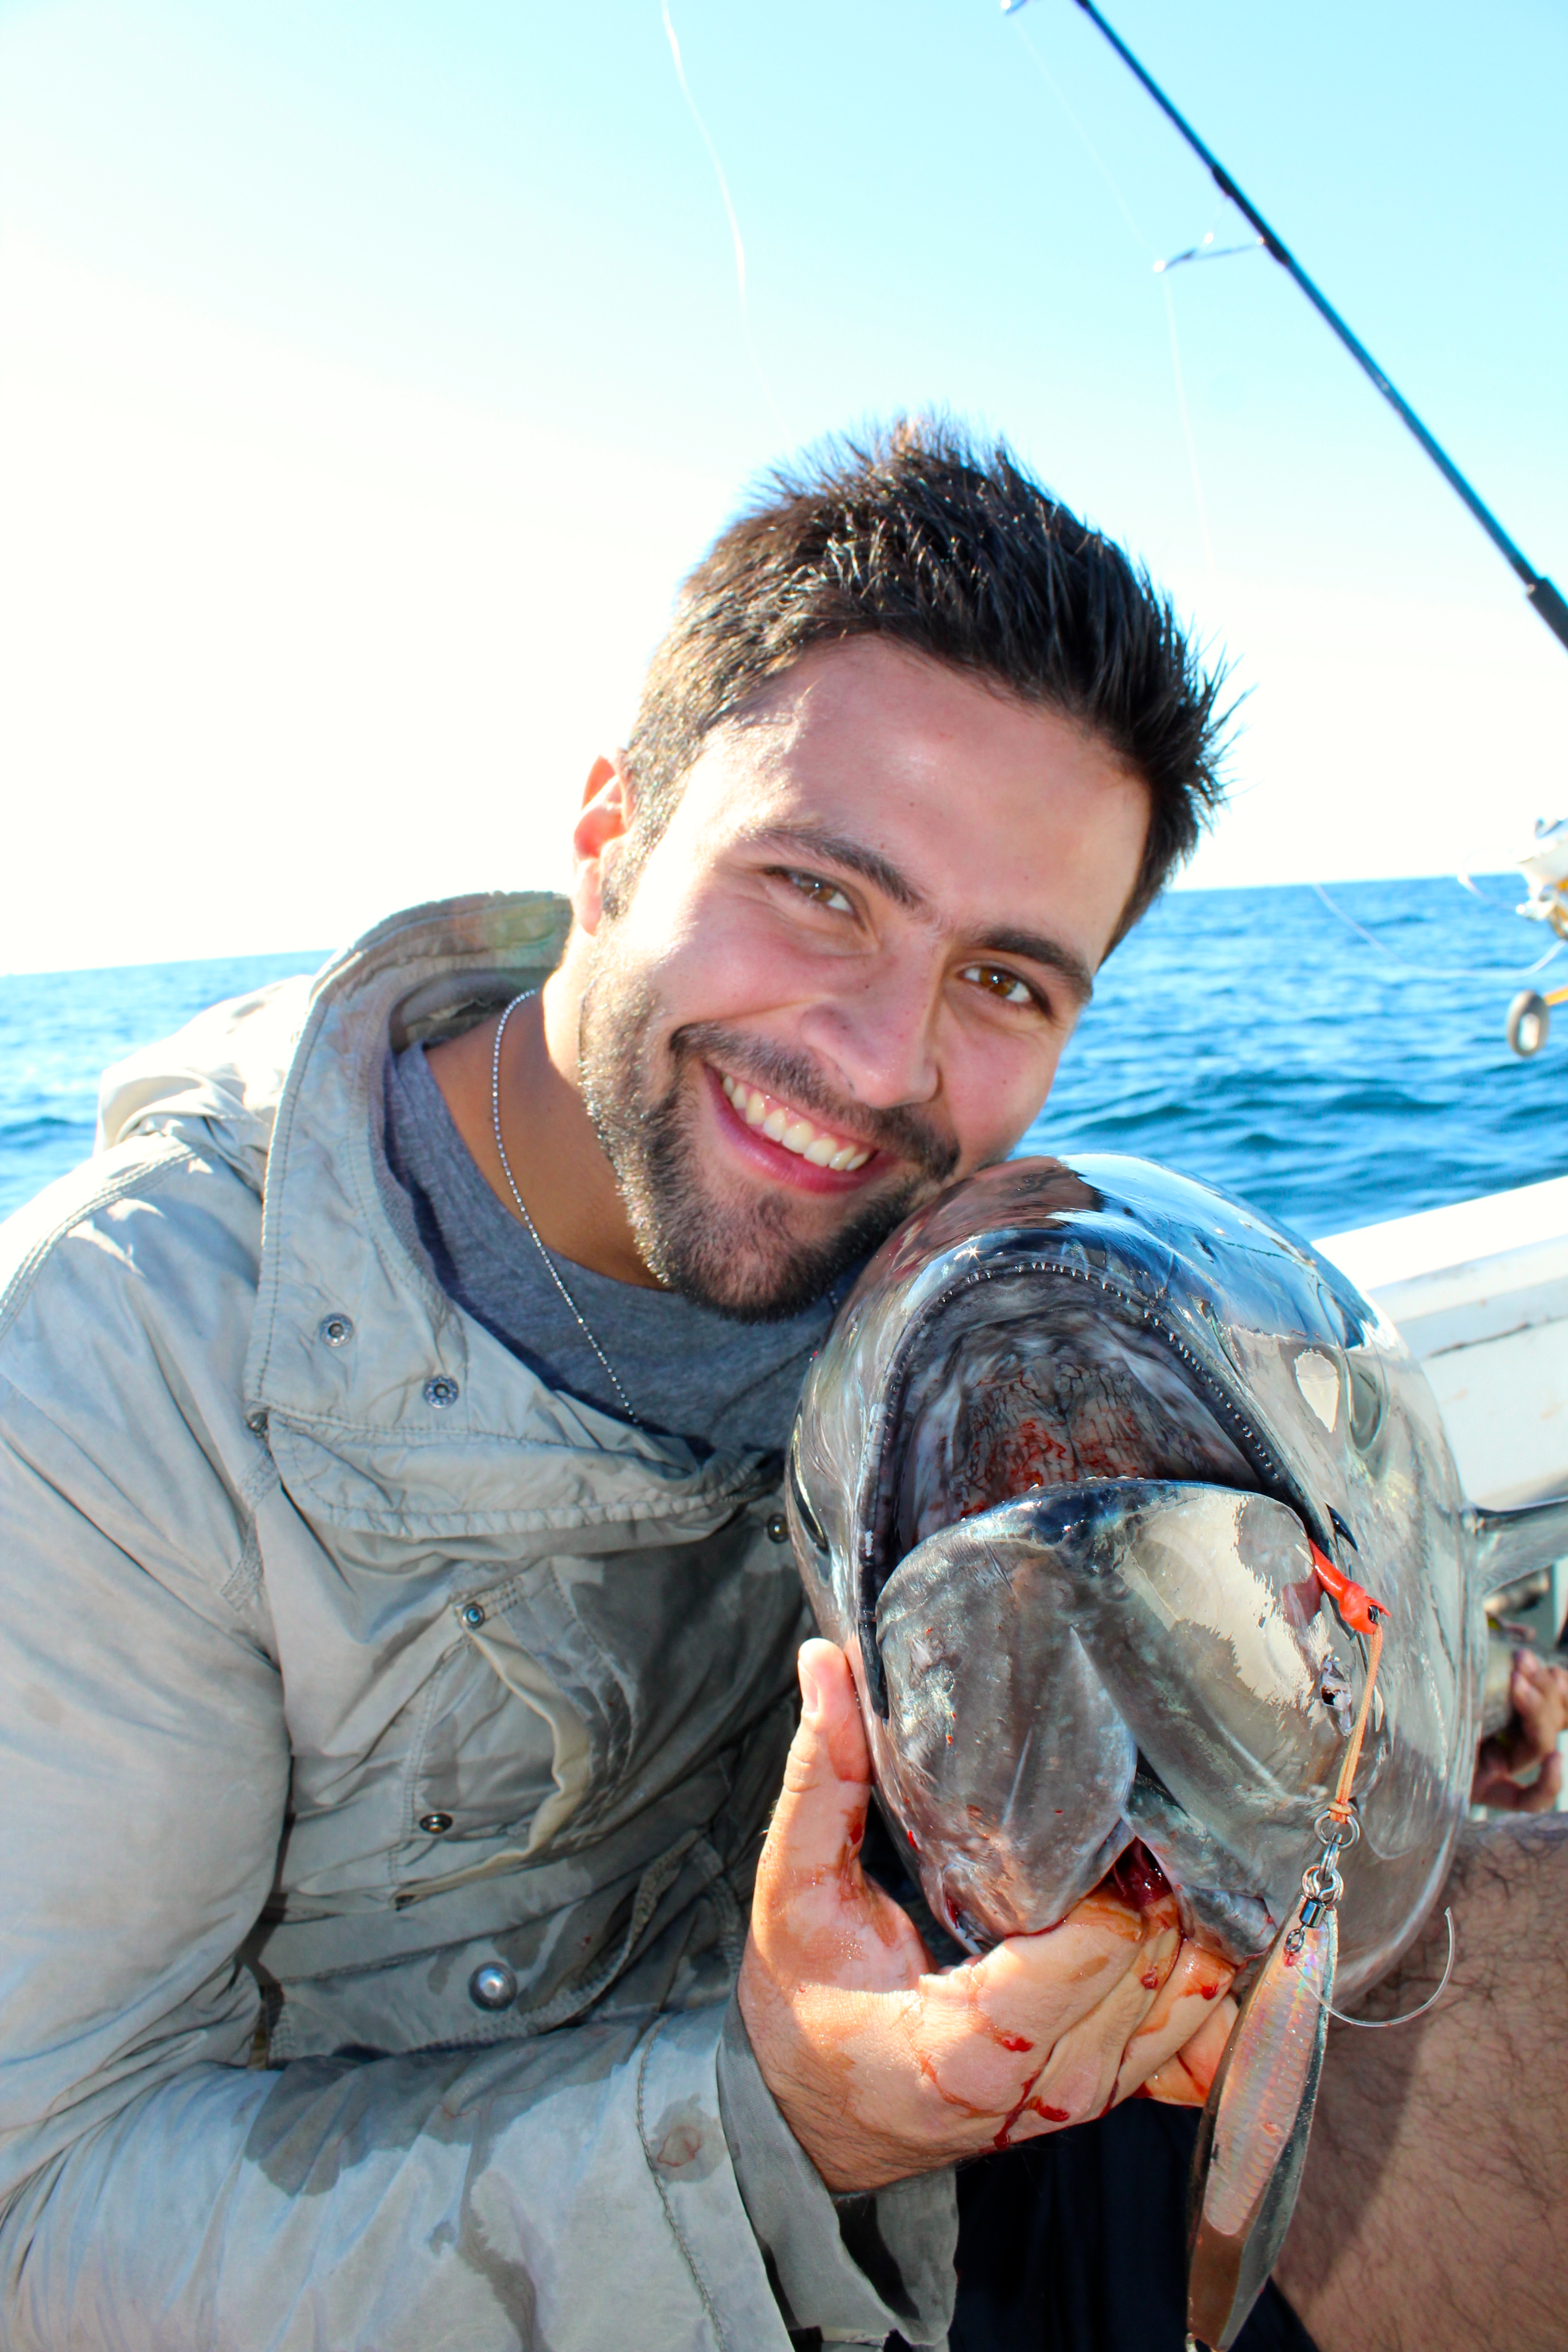 The results...a happy angler after landing a bluefin on a jig aboard Coastal Charters Sportfishing.